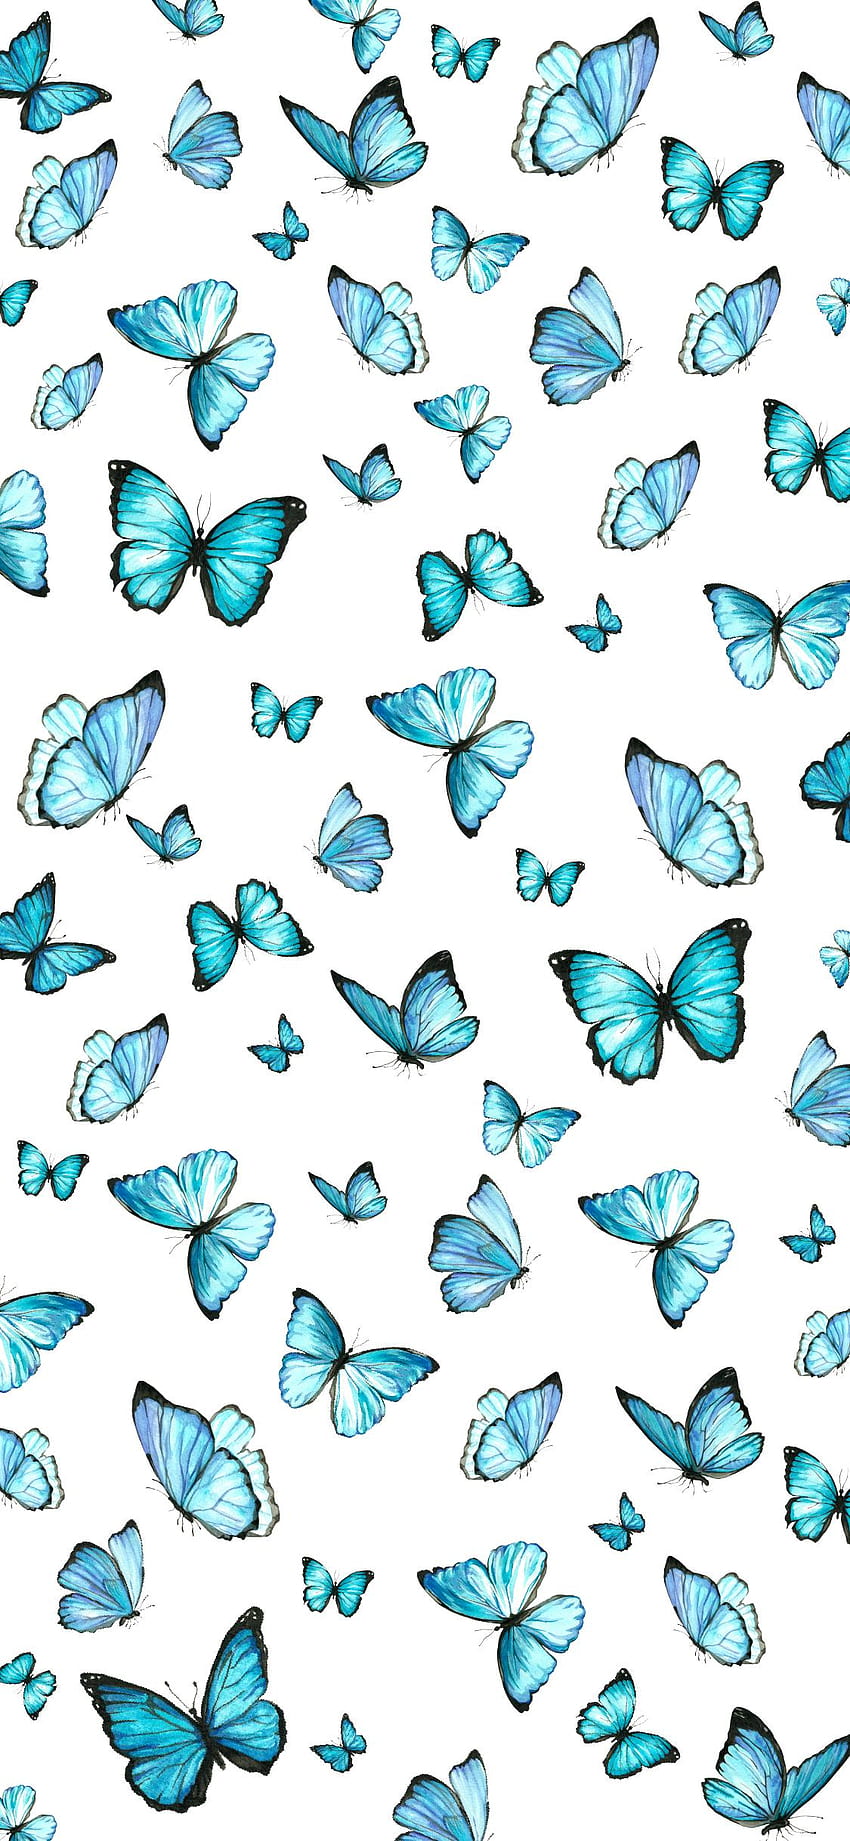 Wallpaper Blue Butterflies on White Wall Background  Download Free Image